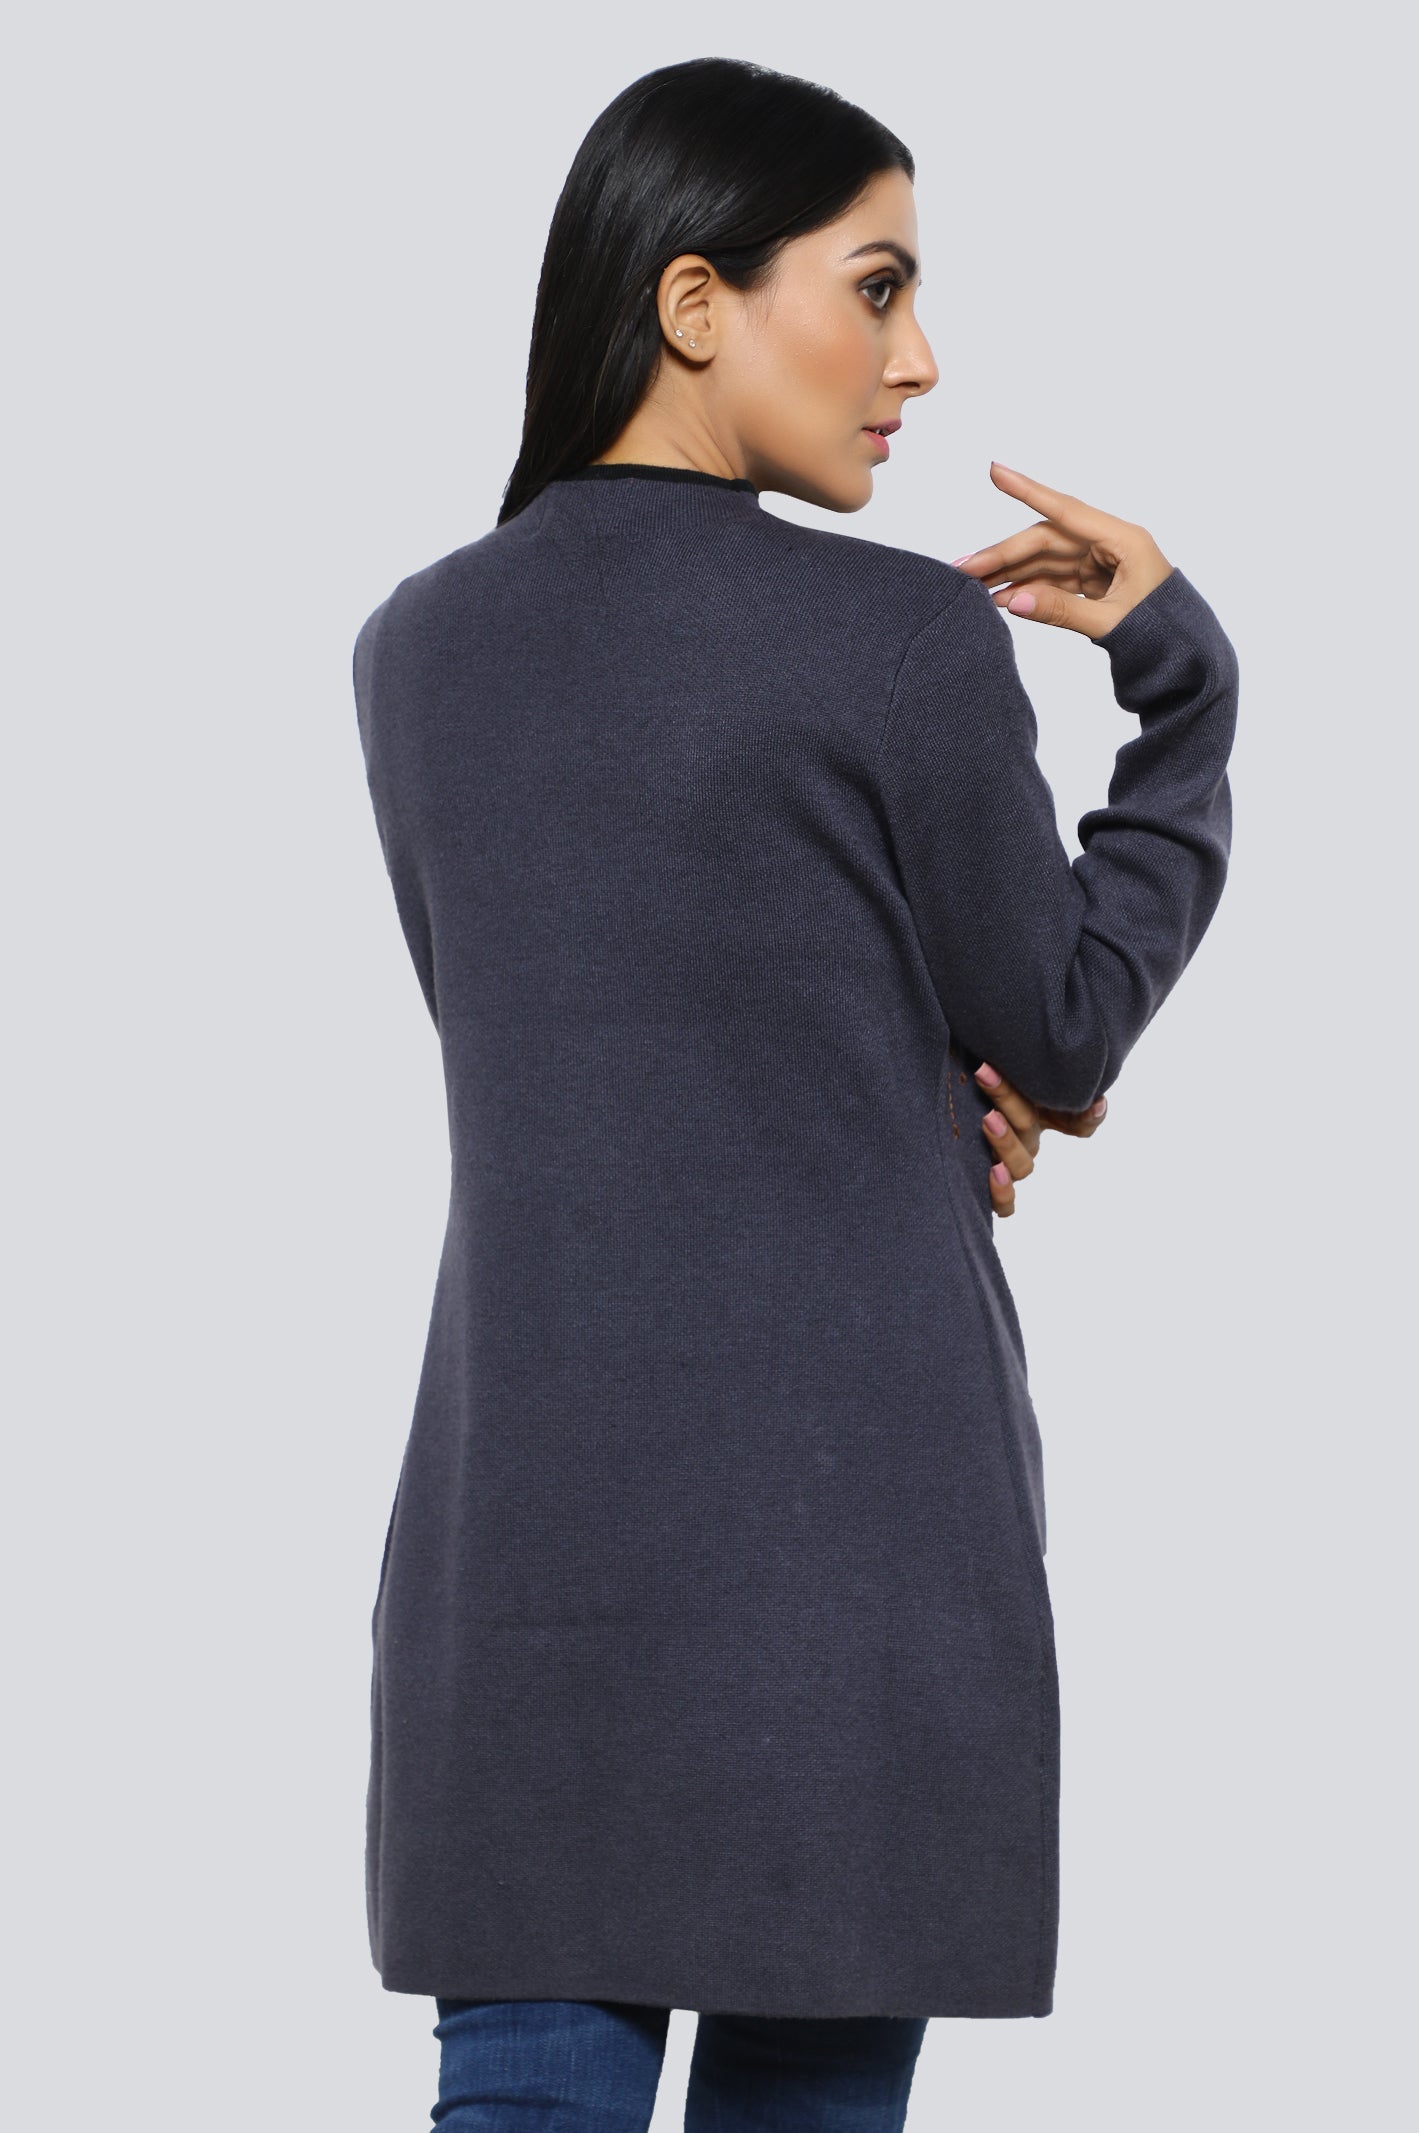 Women's Sweater - Diners